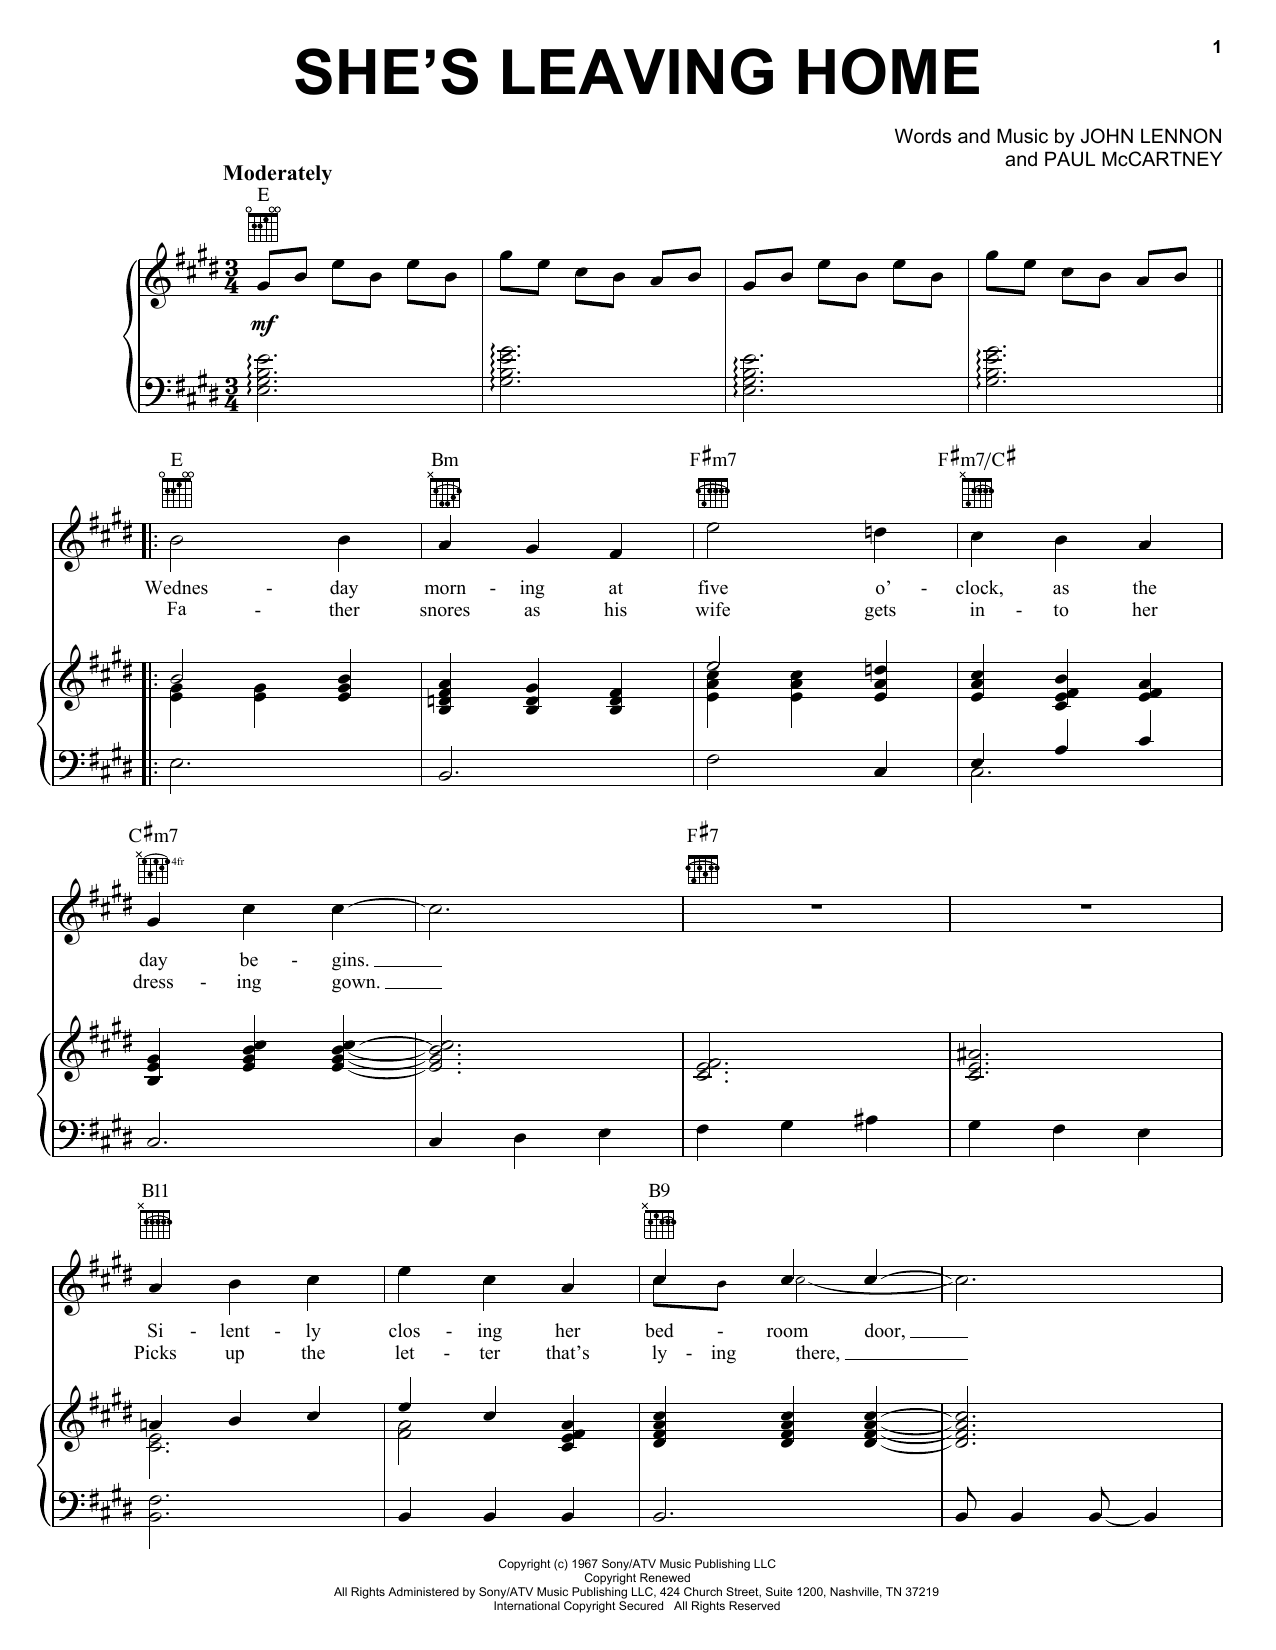 Download The Beatles She's Leaving Home Sheet Music